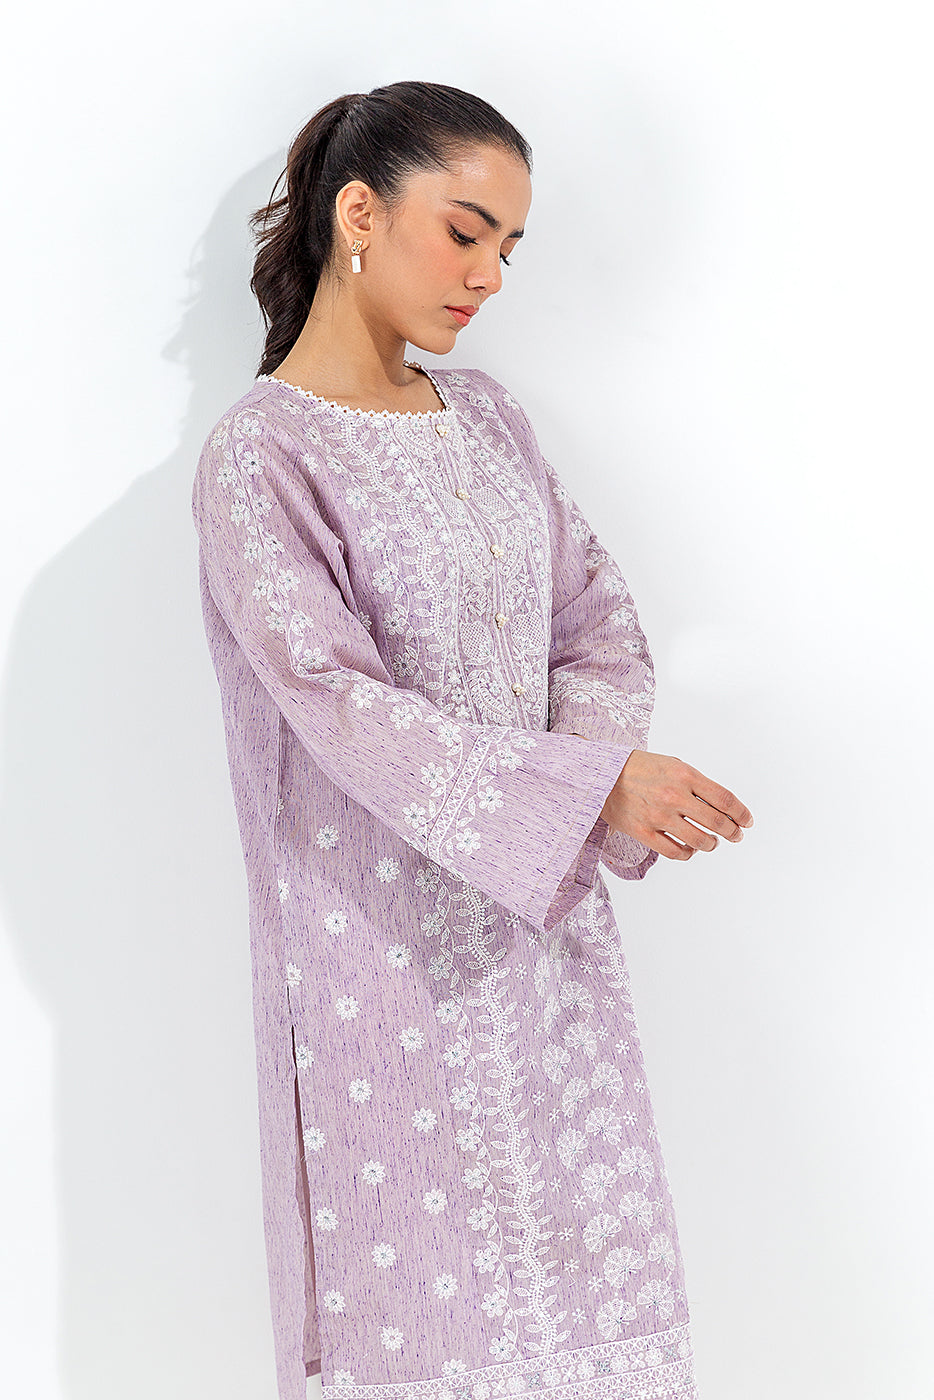 EMBROIDERED FANCY NEPS SHIRT (LUXURY PRET) - BEECHTREE